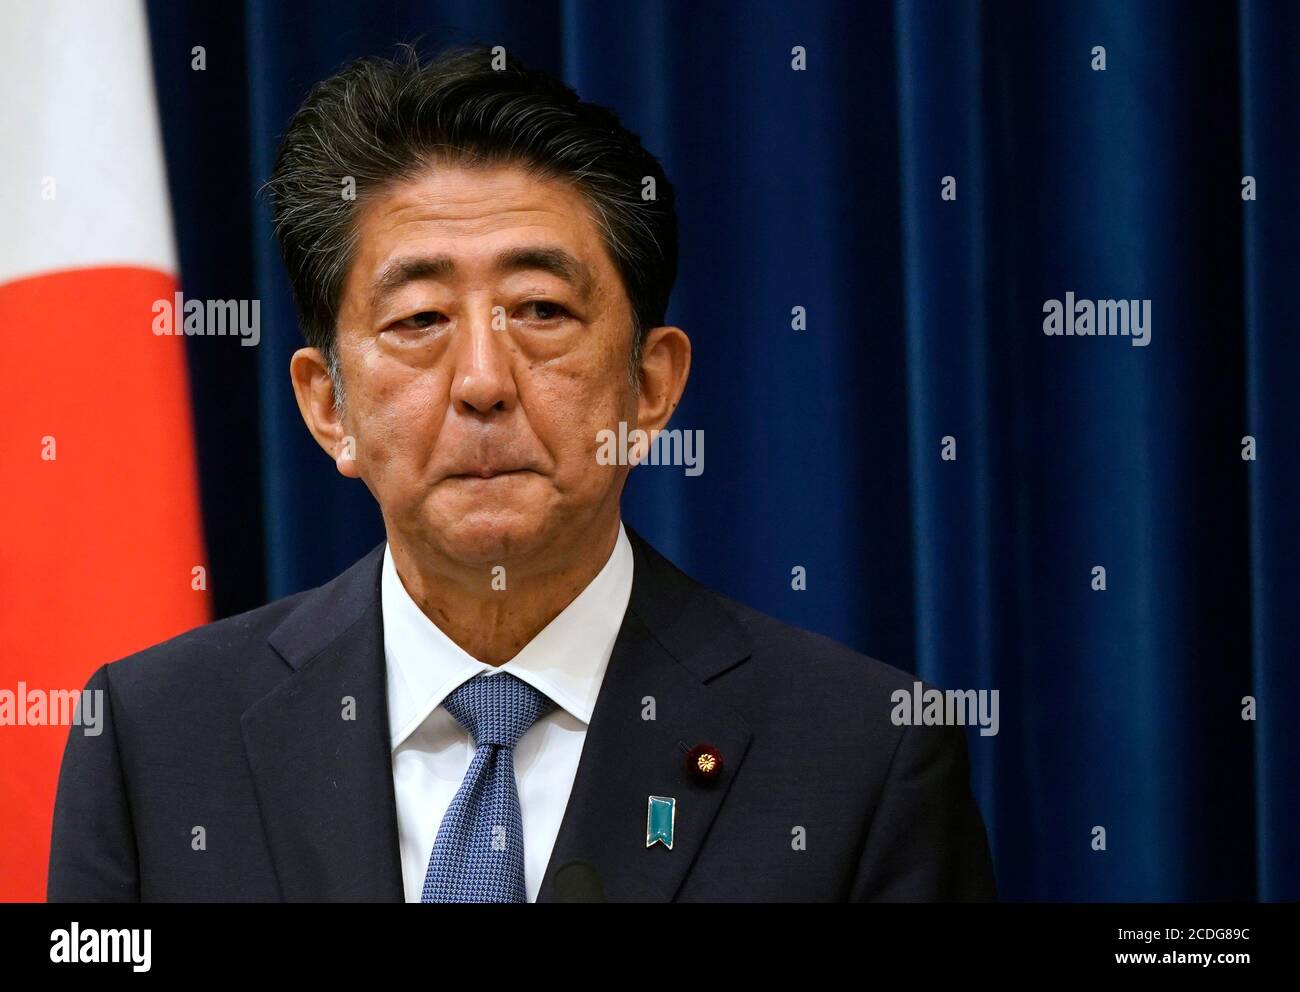 Tokyo, Japan. 28th Aug, 2020. Japanese Prime Minister SHINZO ABE reacts during a press conference at the prime minister official residence in Tokyo, Japan, 28 August 2020. Prime Minister Shinzo Abe announced his resignation due to health concerns. Credit: POOL/ZUMA Wire/Alamy Live News Stock Photo